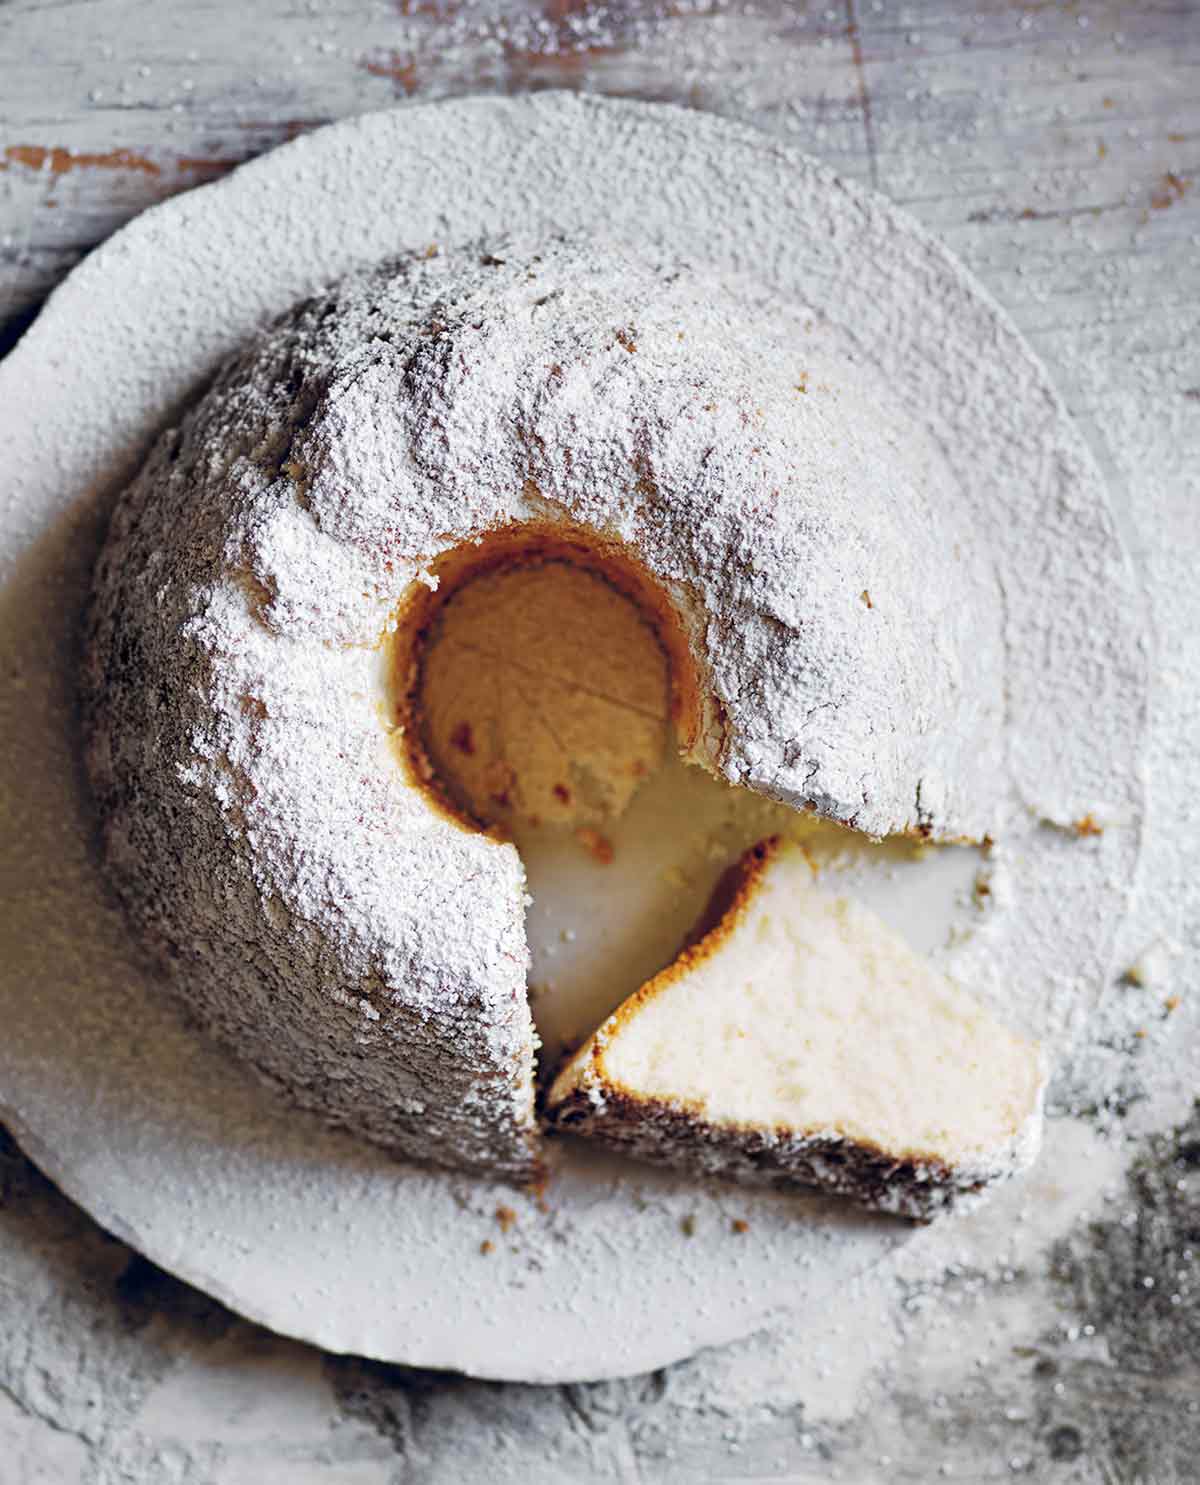 A vanilla angel food cake in Bundt form, with a slice on its side, all sprinkled with powdered sugar